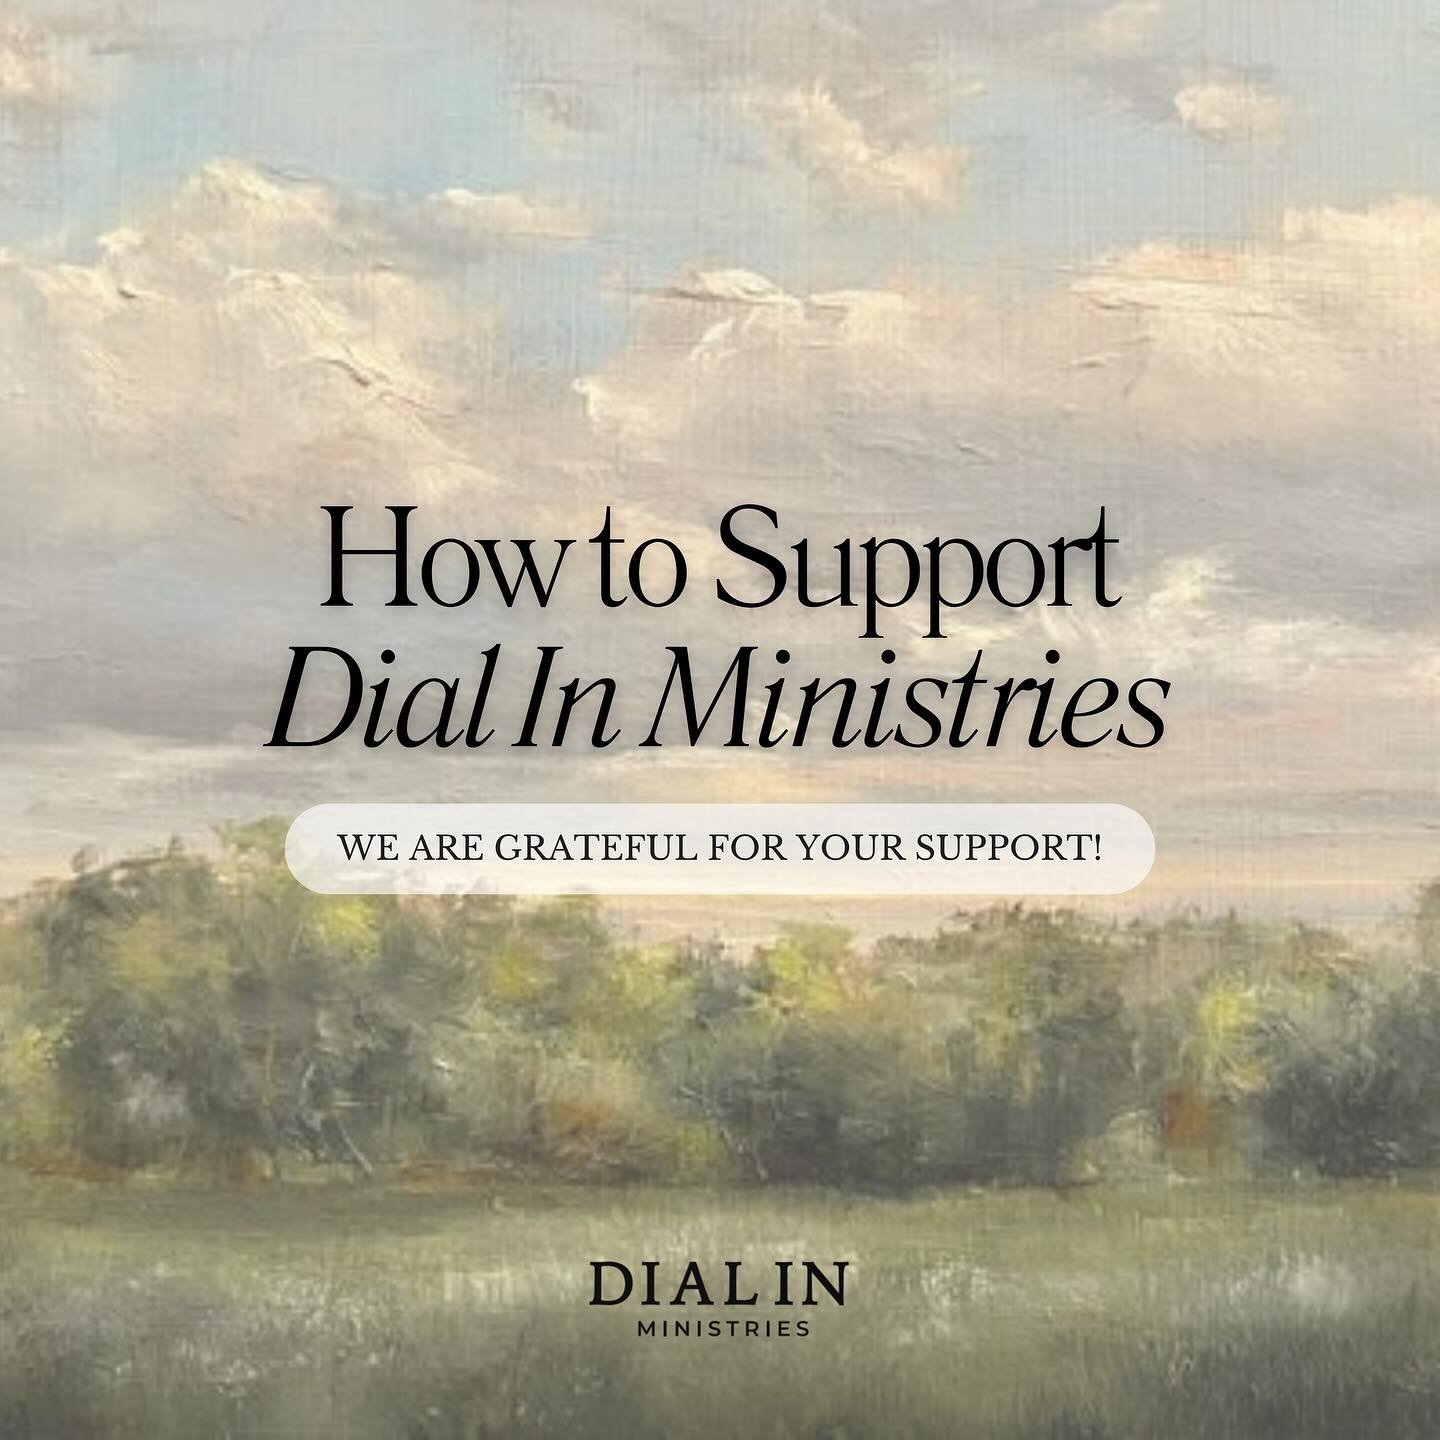 Exciting new! Last week we announced that @dialinministries is officially a non-profit! We are so thankful for the kind words and financial support that has already come in! Thank you!

Our mission is to provide Biblical resourcing that is creative a